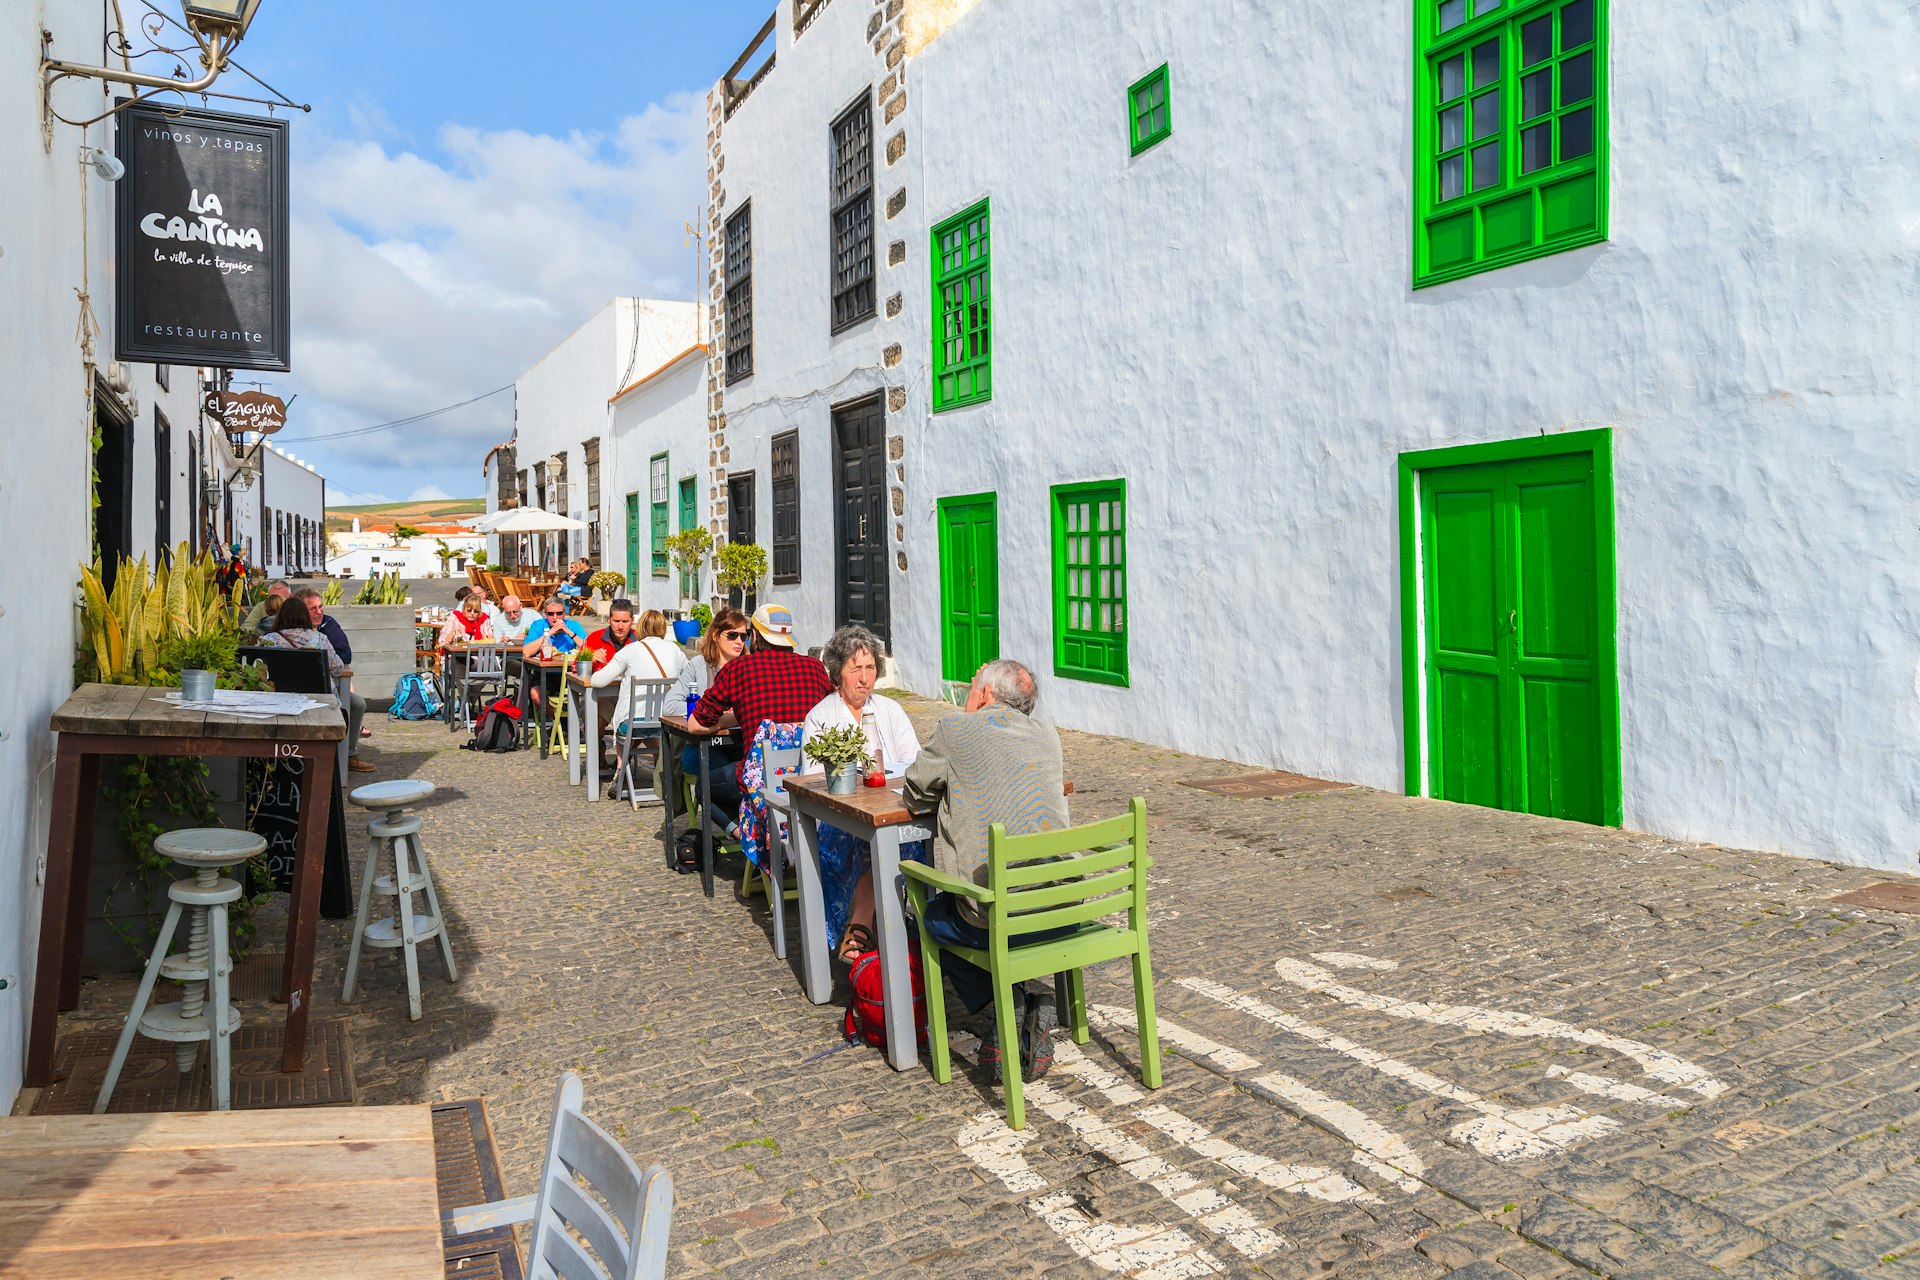 tourists sitting in local restaurant in old town of Teguise. This town is former capital of Lanzarote island and is very popular attraction to see.